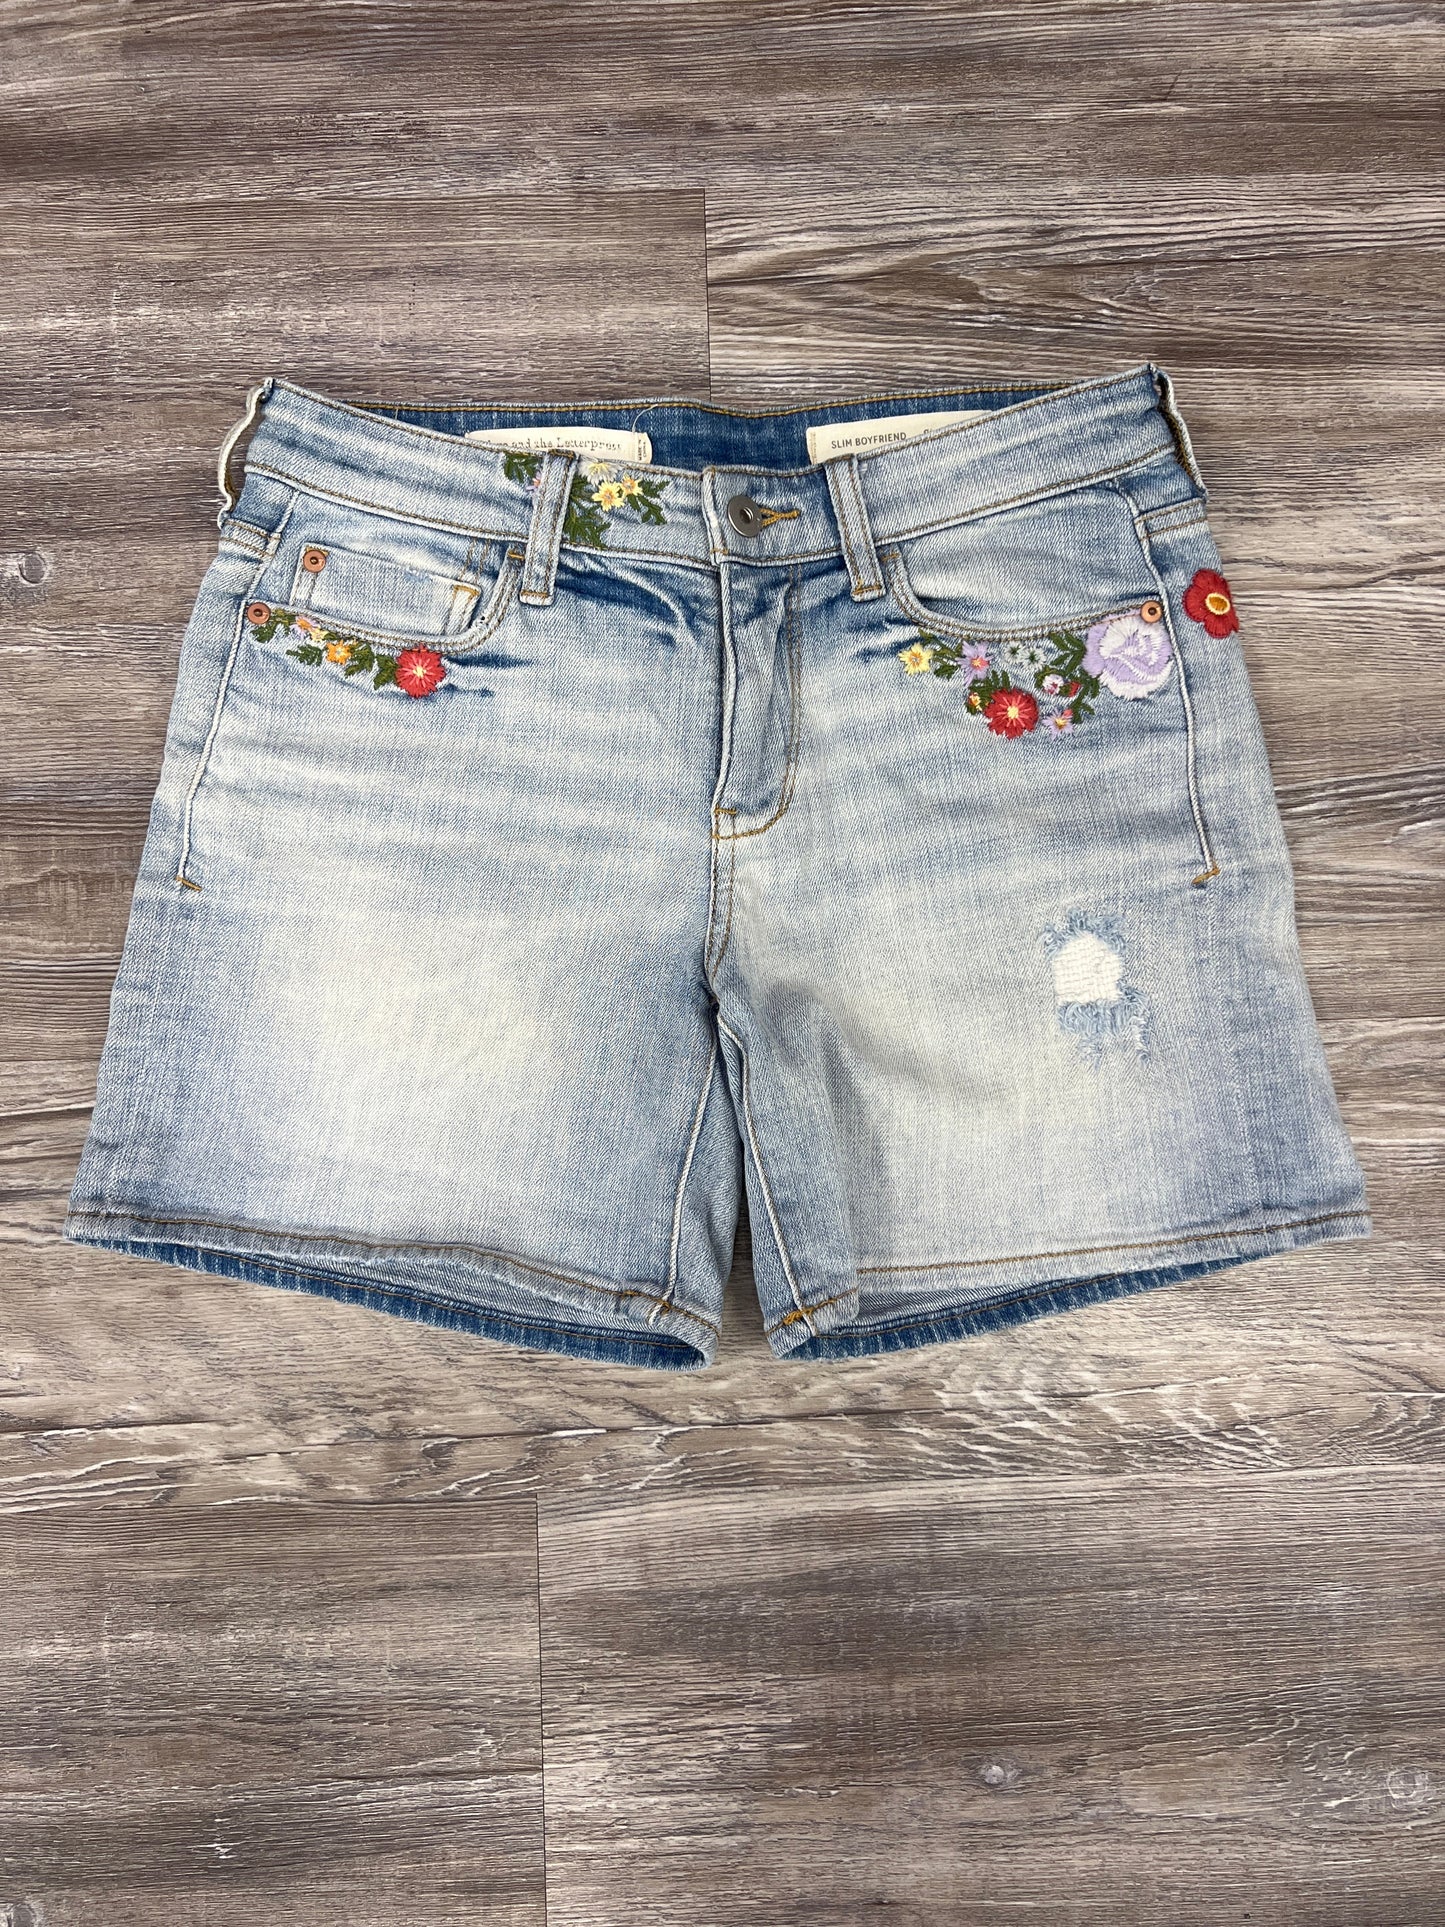 Shorts By Pilcro Size: 0